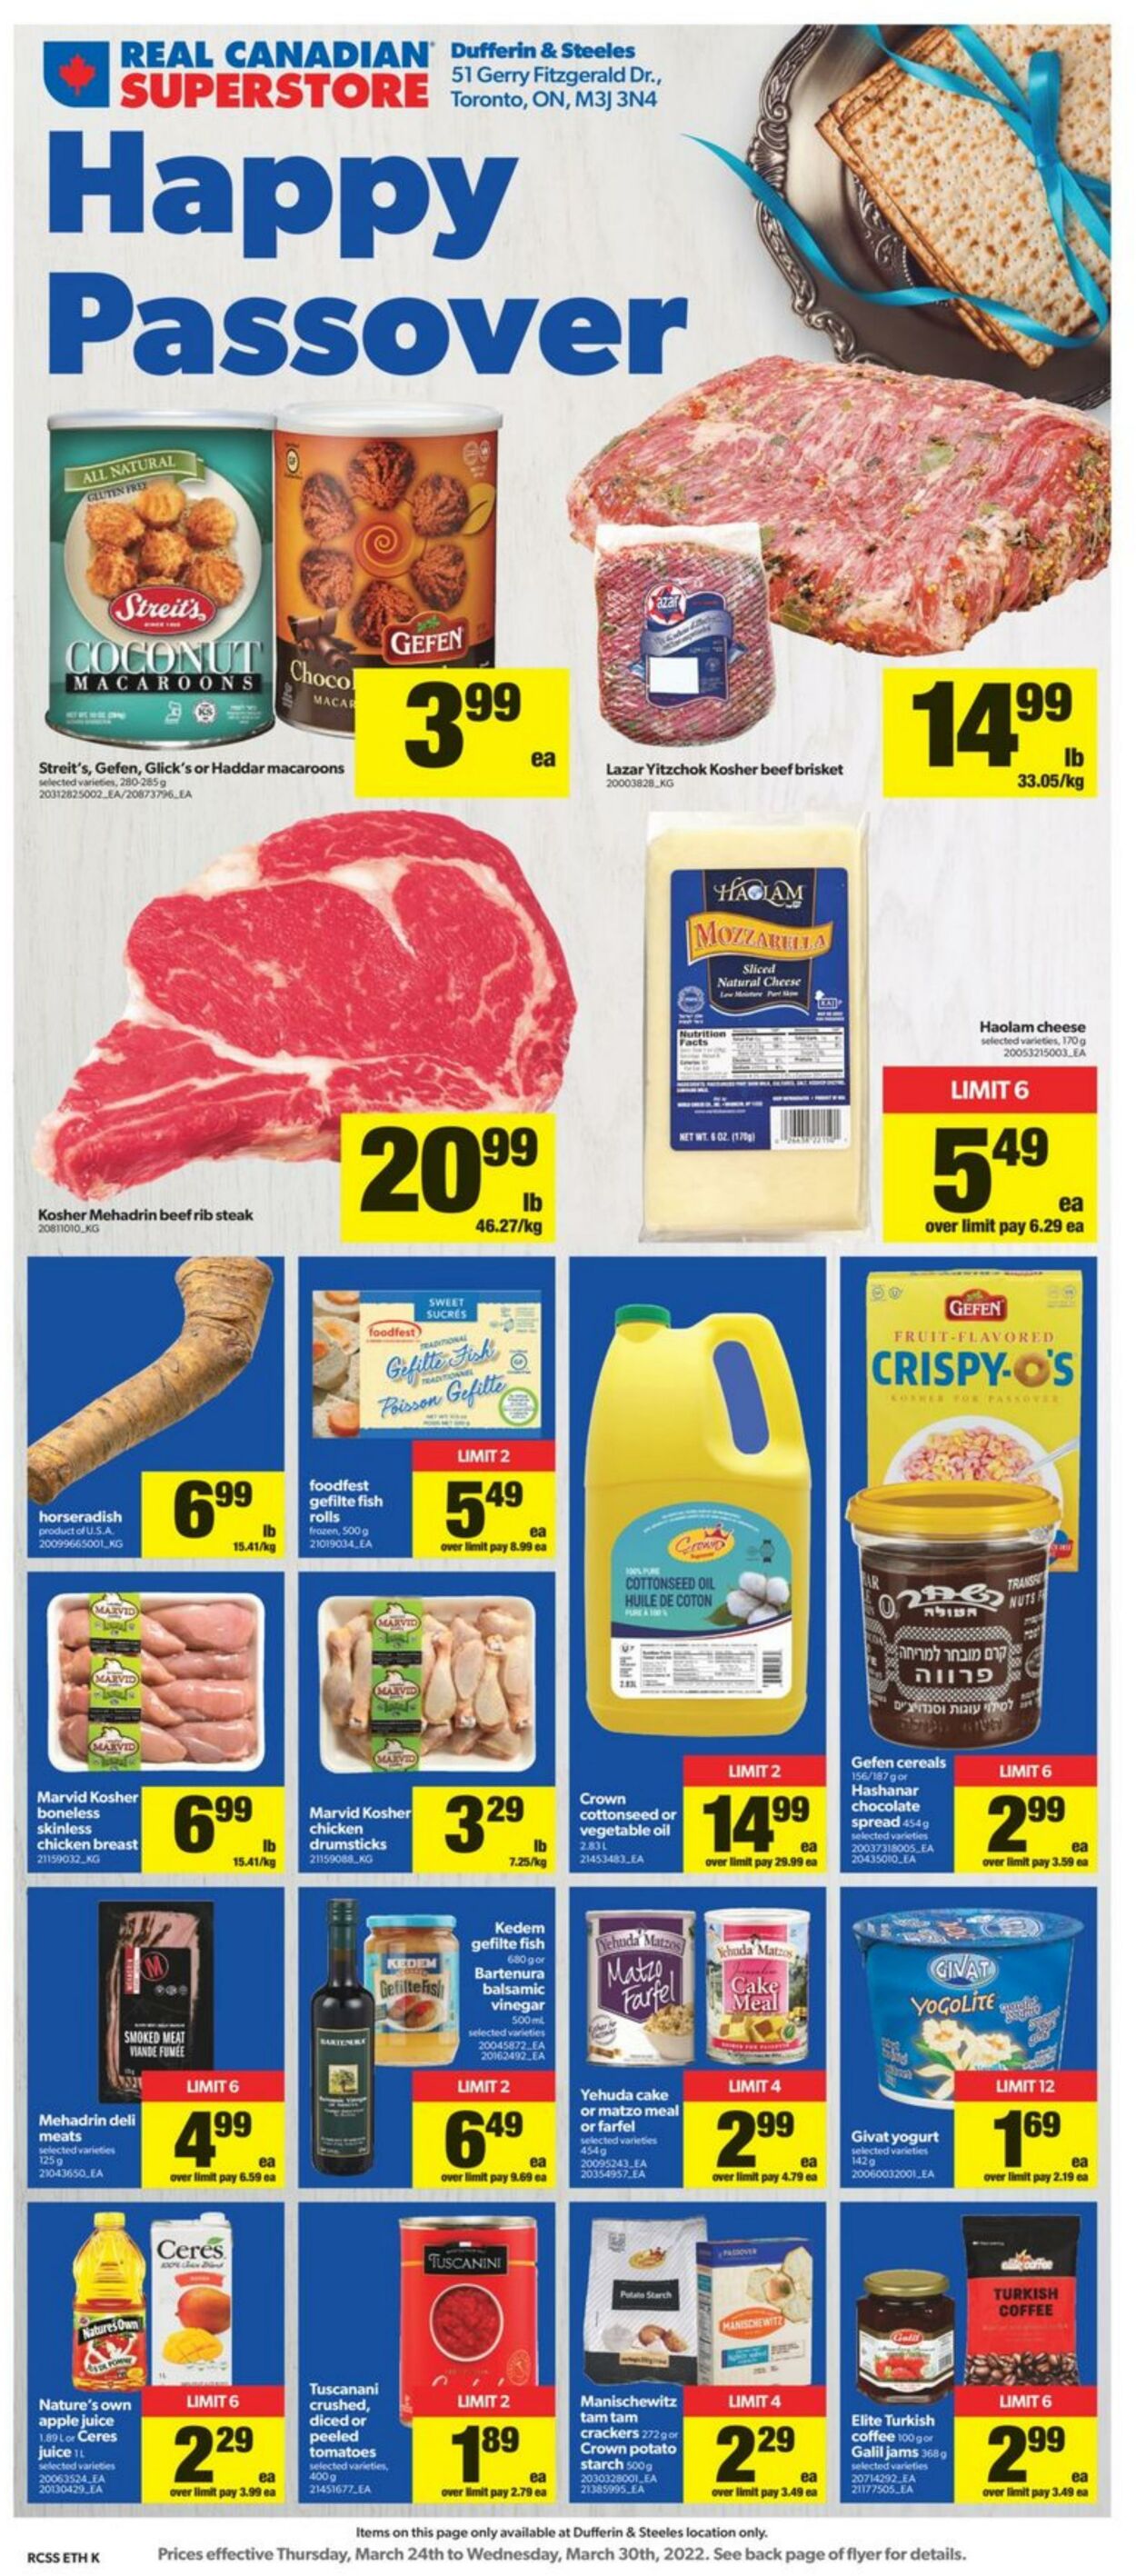 Flyer Real Canadian Superstore 24.03.2022 - 30.03.2022